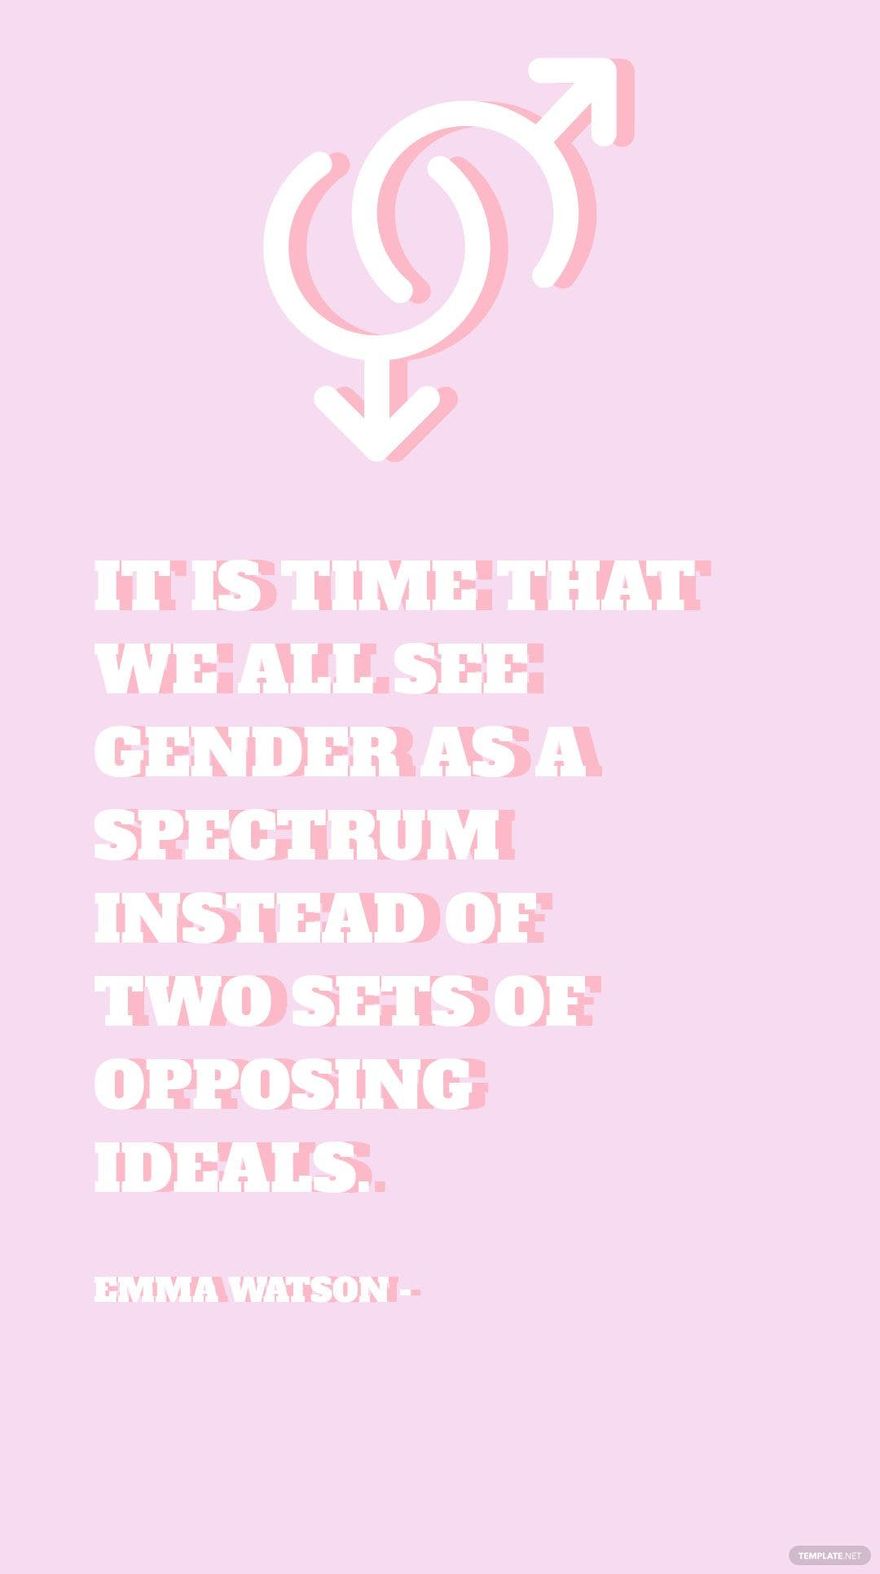 Emma Watson - It is time that we all see gender as a spectrum instead of two sets of opposing ideals.